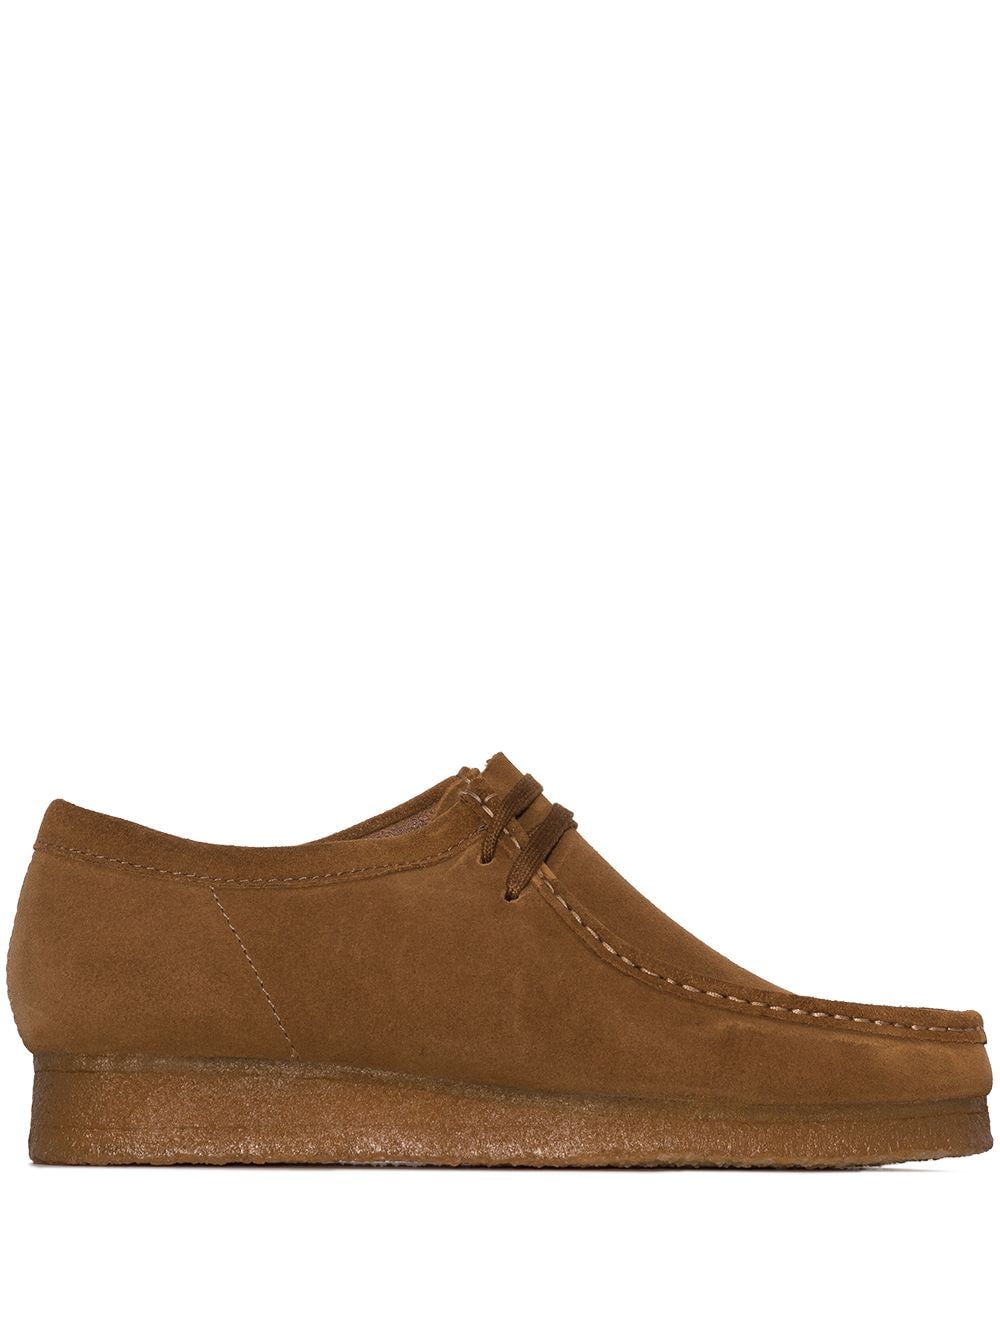 Wallabee Leather Laced Shoes мъжки обувки Clarks 844222585_40